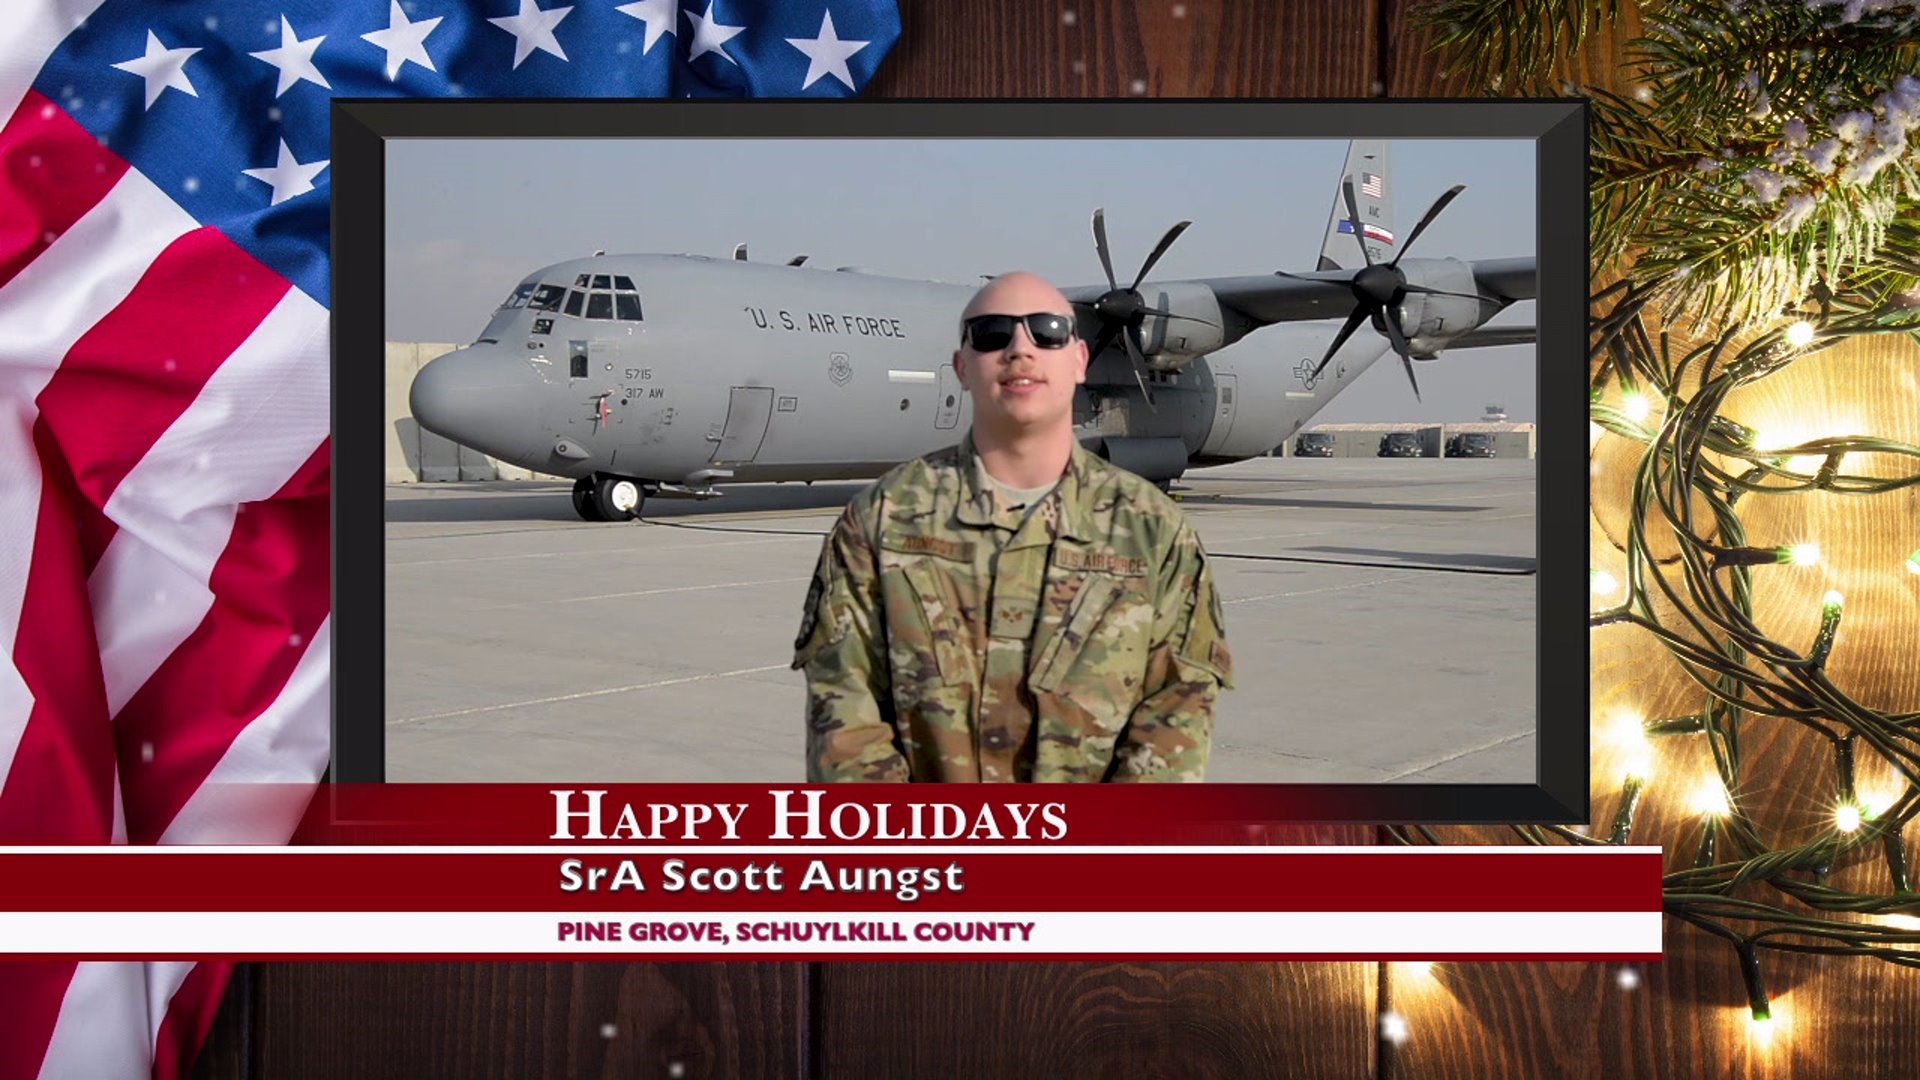 Military Holiday Greeting 2018: SrA Scott Aungst